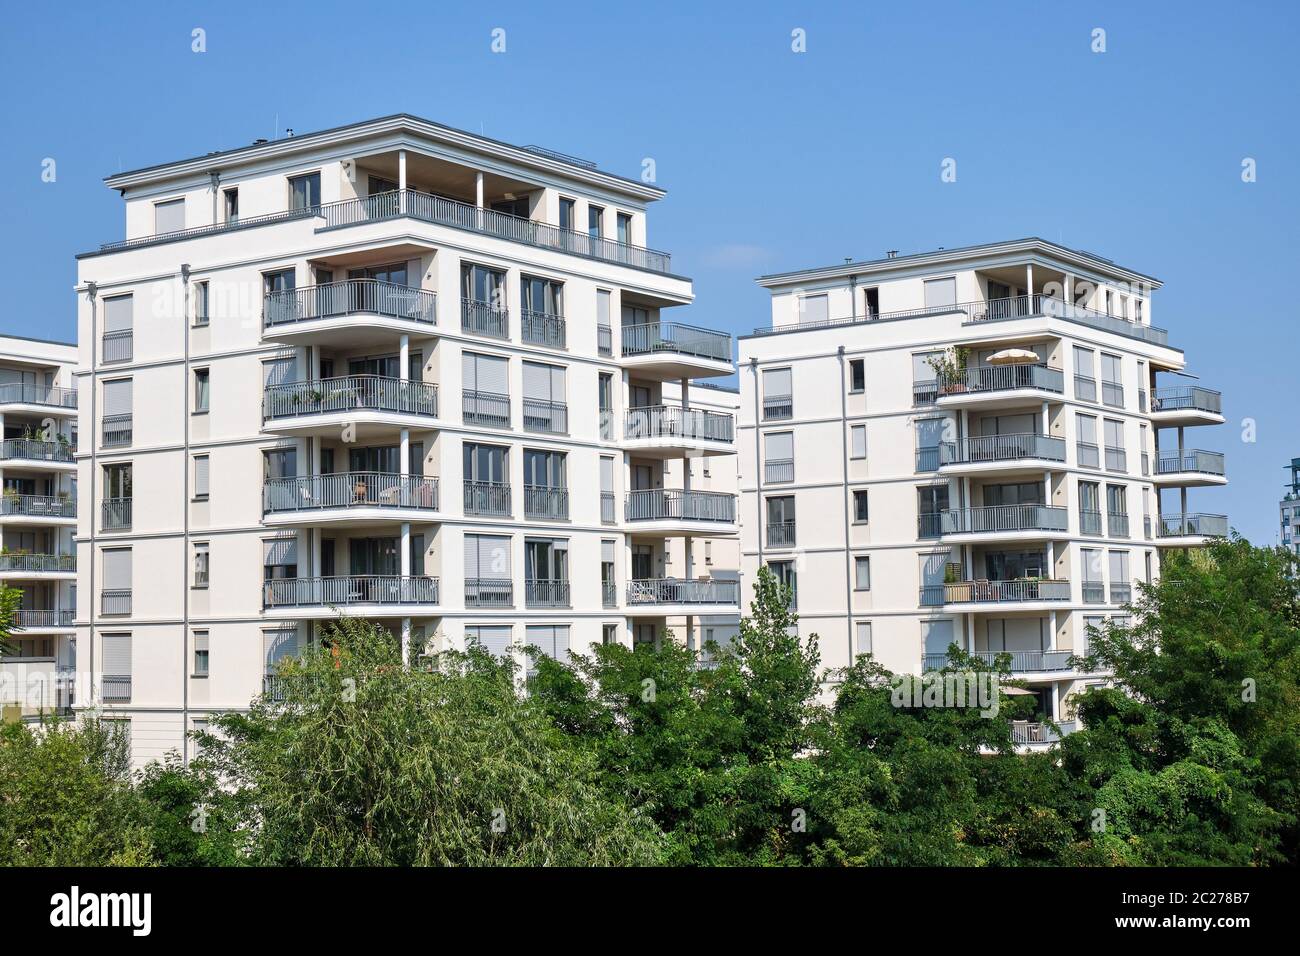 New white apartment houses seen in Berlin, Germany Stock Photo